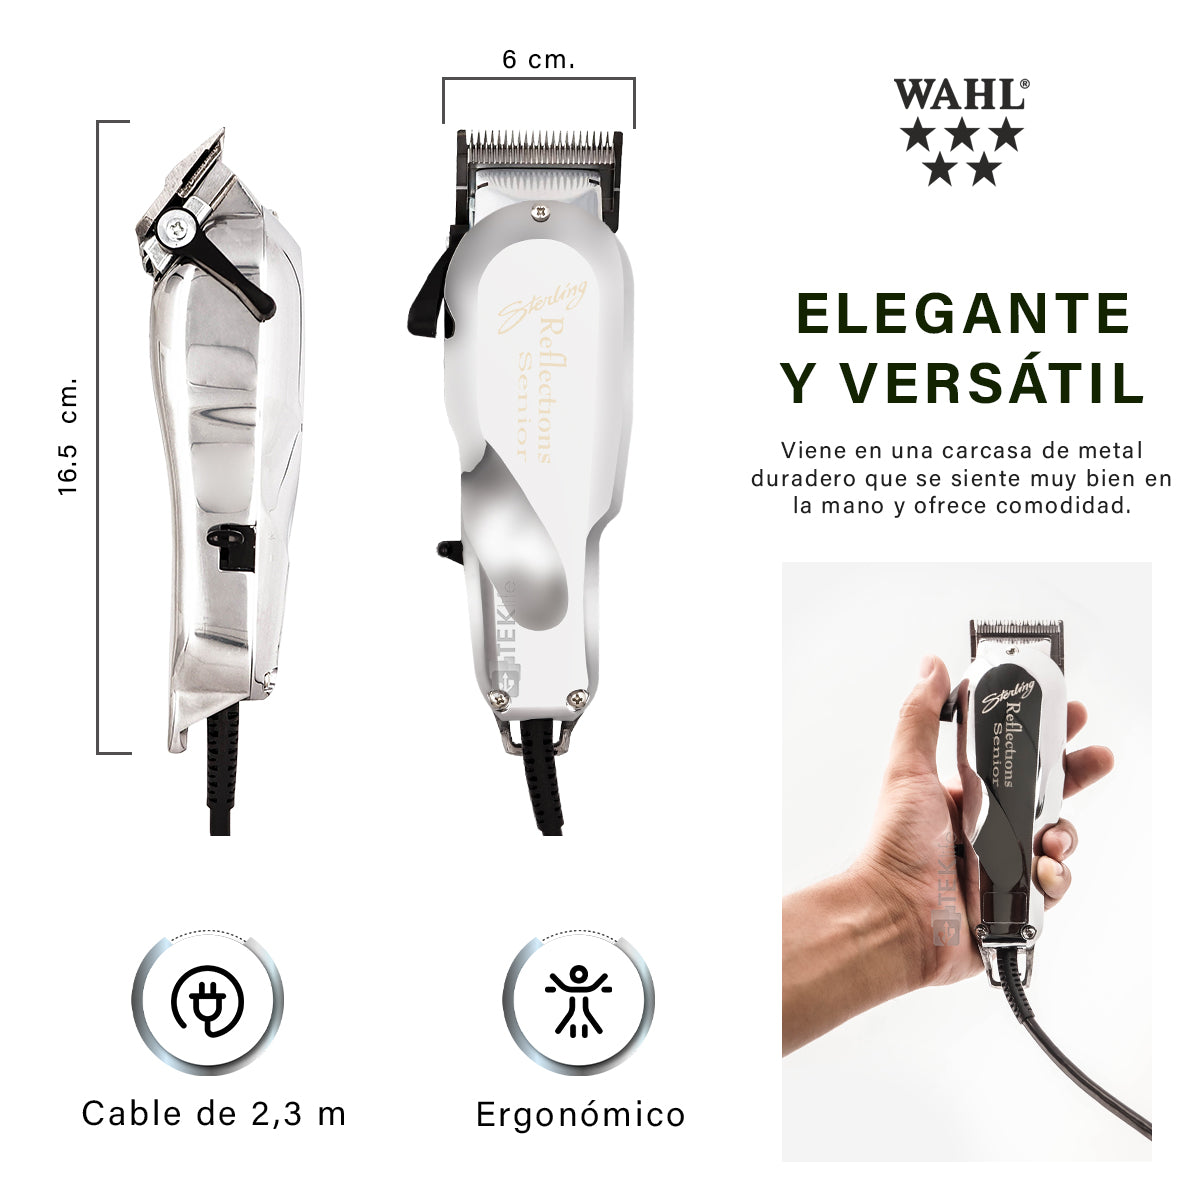 Clipper Profesional Wahl Sterling Reflections Senior